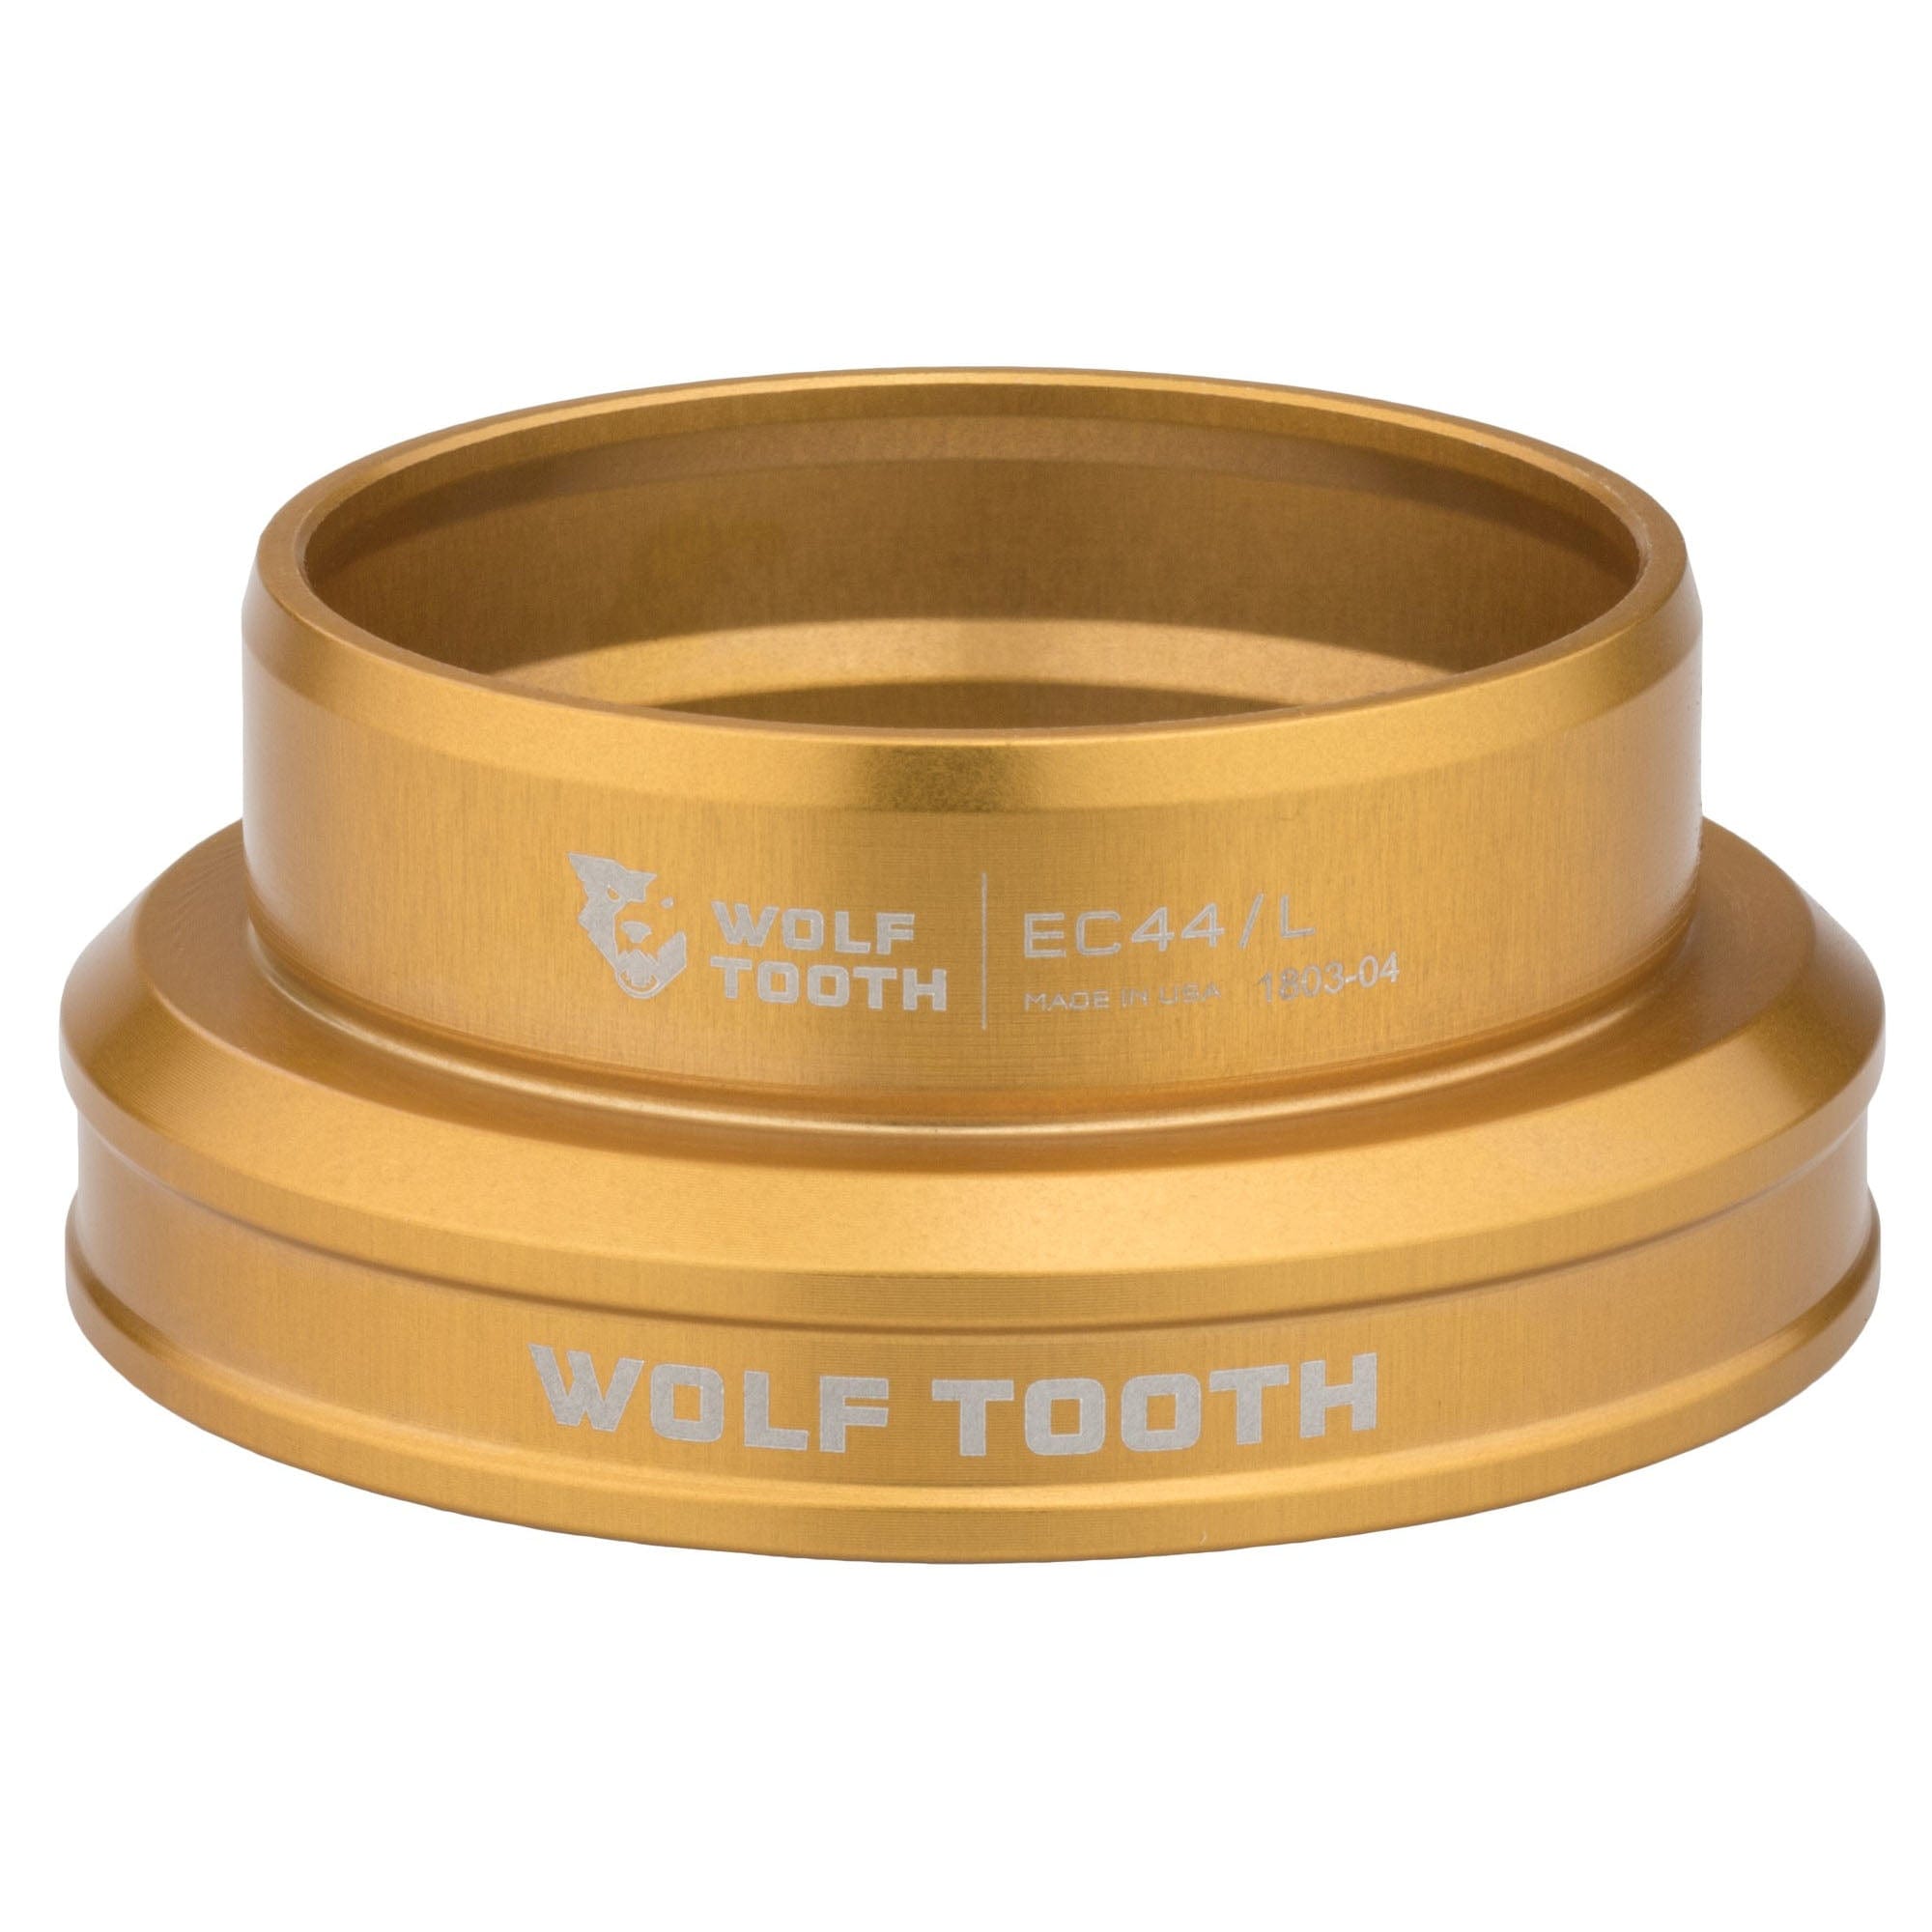 Lower / EC44/40 / Gold Wolf Tooth Premium EC Headsets - External Cup